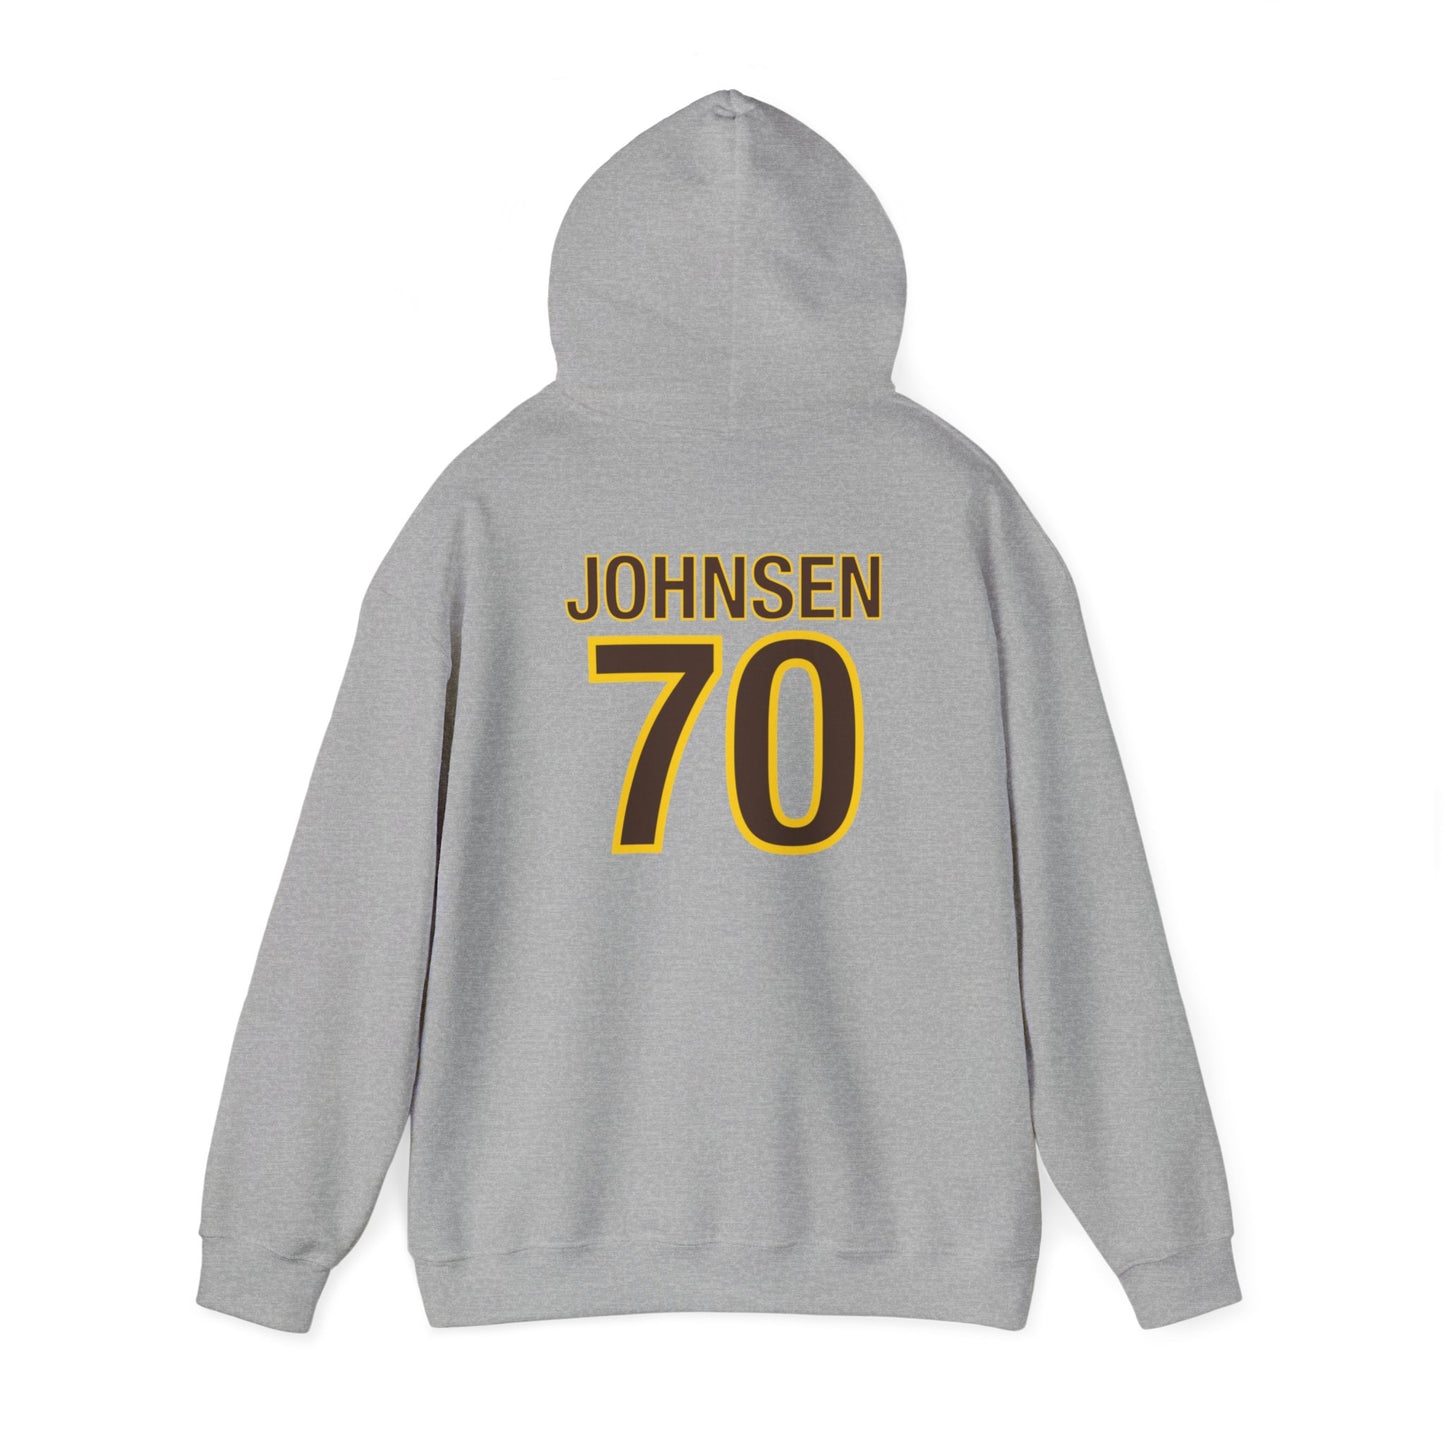 7 Zero is Our Hero With 70 and Johnson On The Back